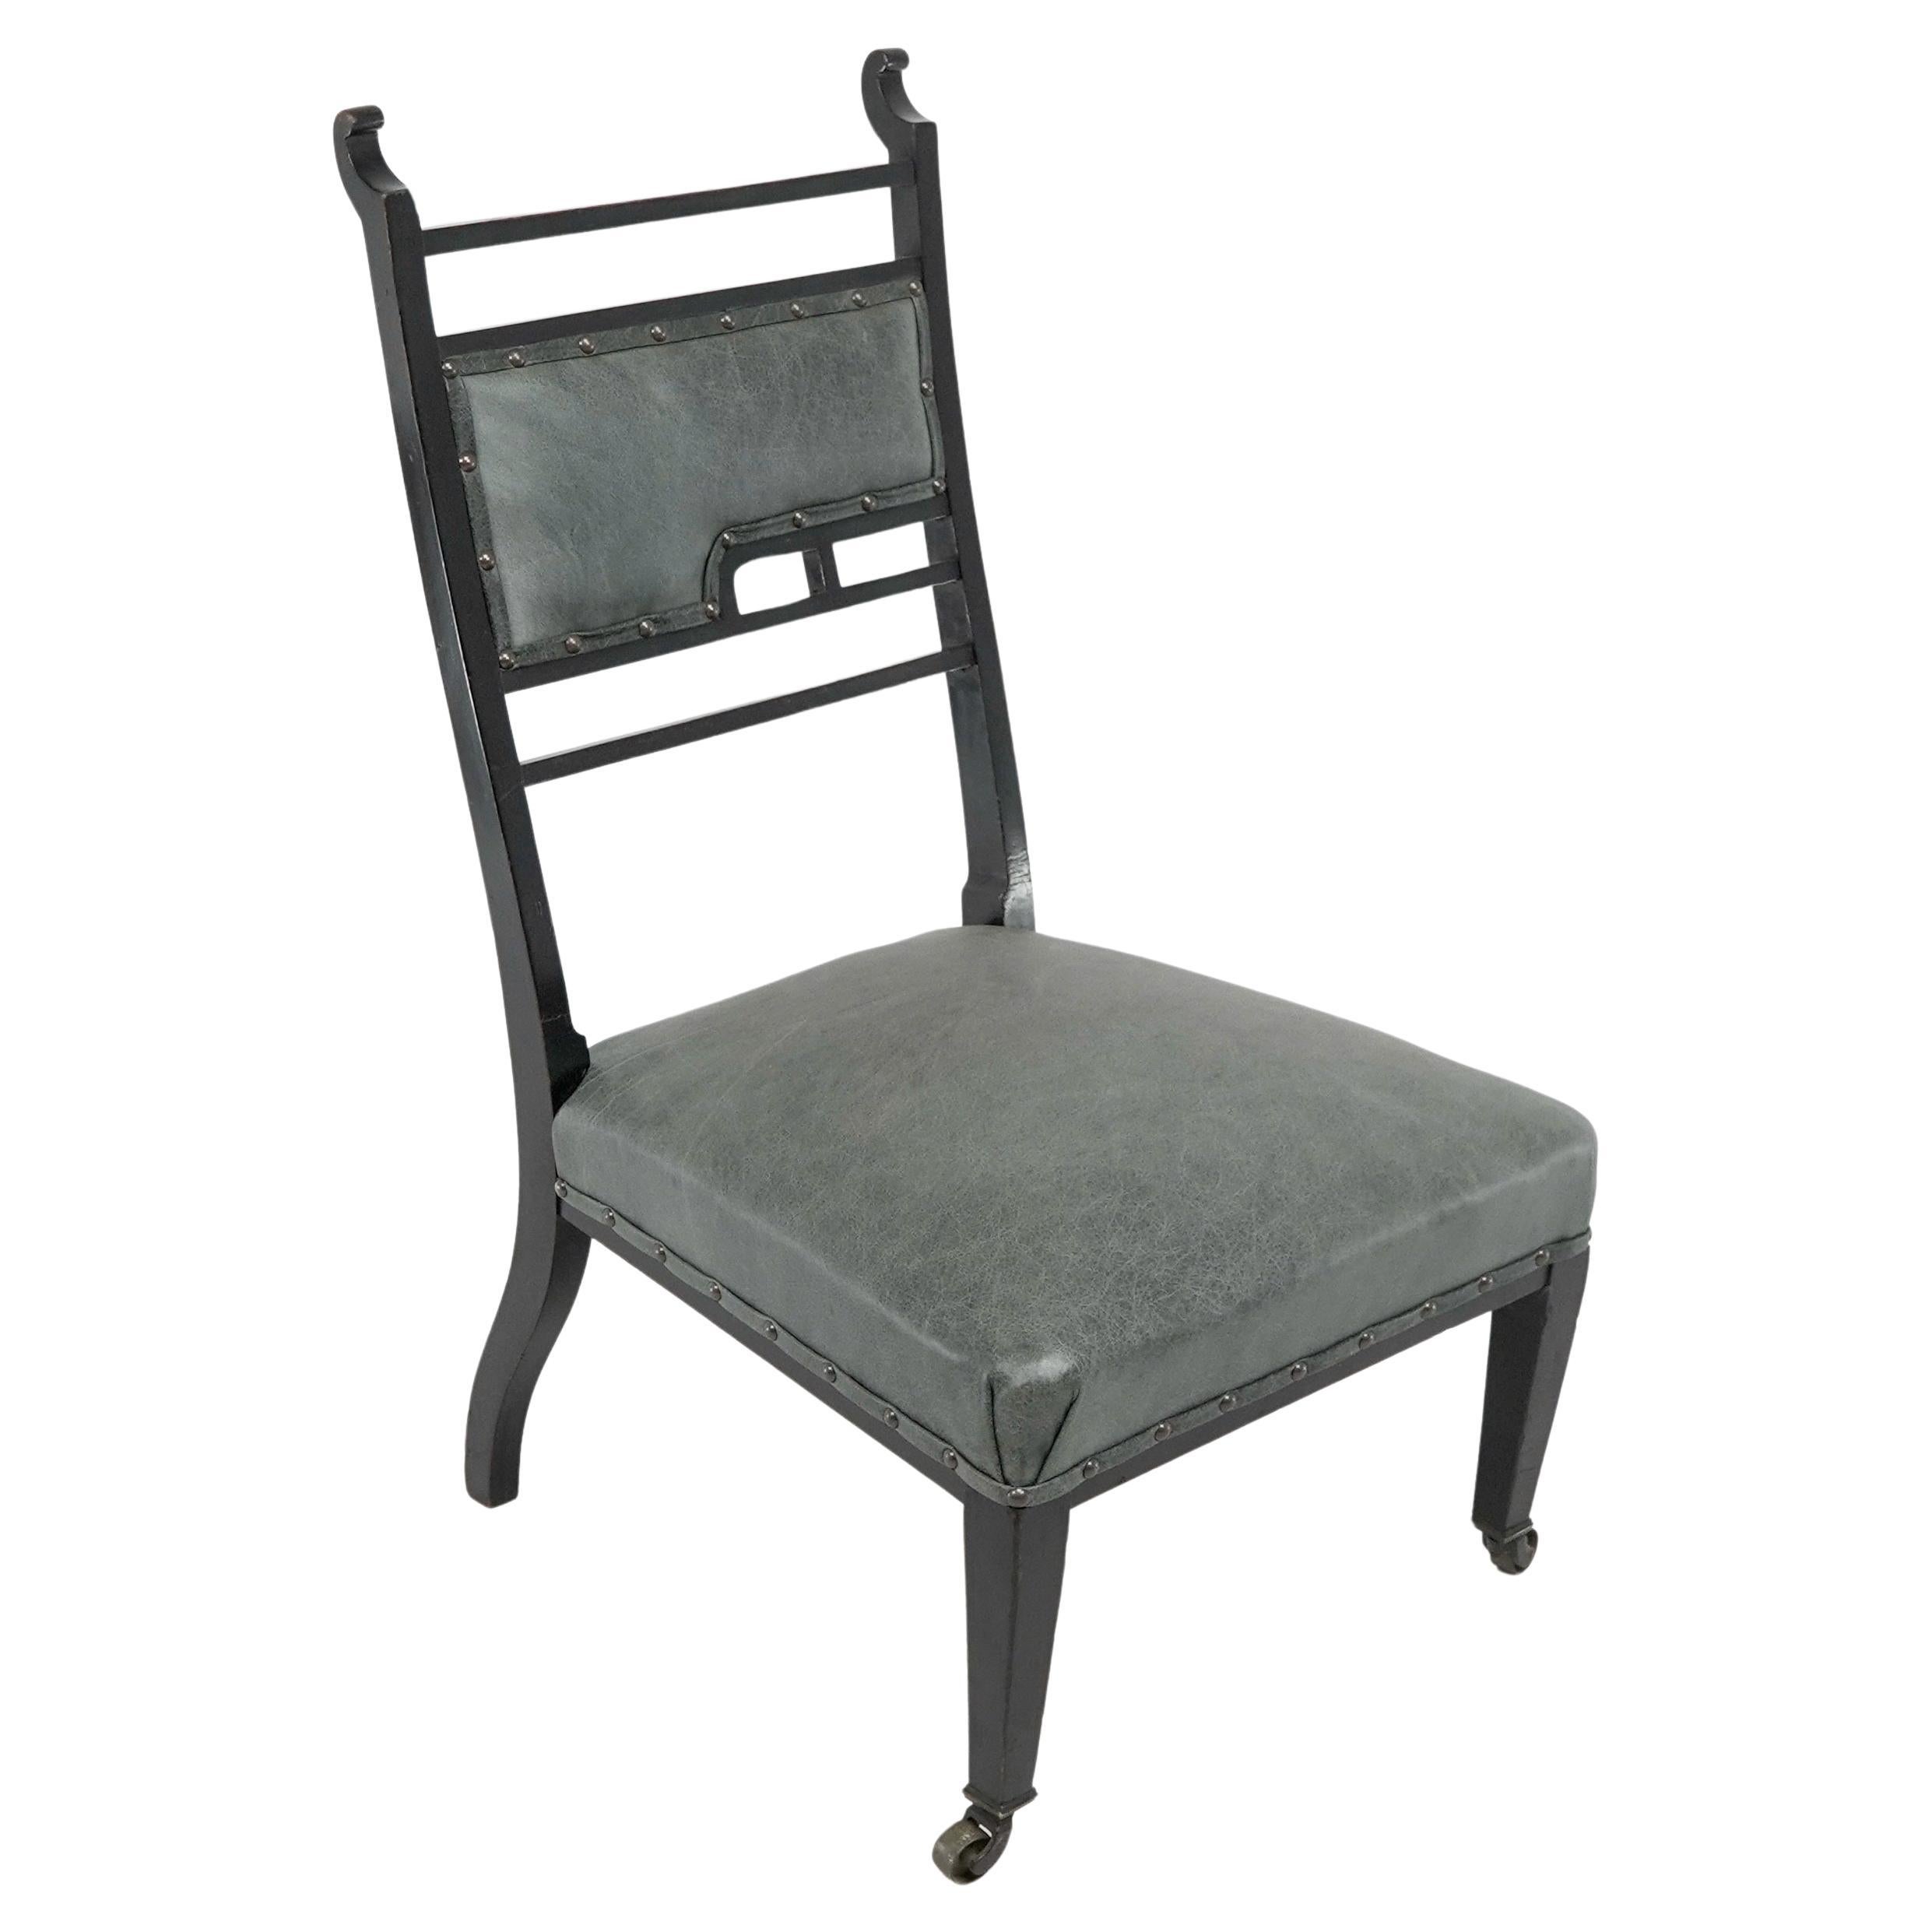 An Anglo-Japanese ebonized side or nursing chair with green hide upholstery